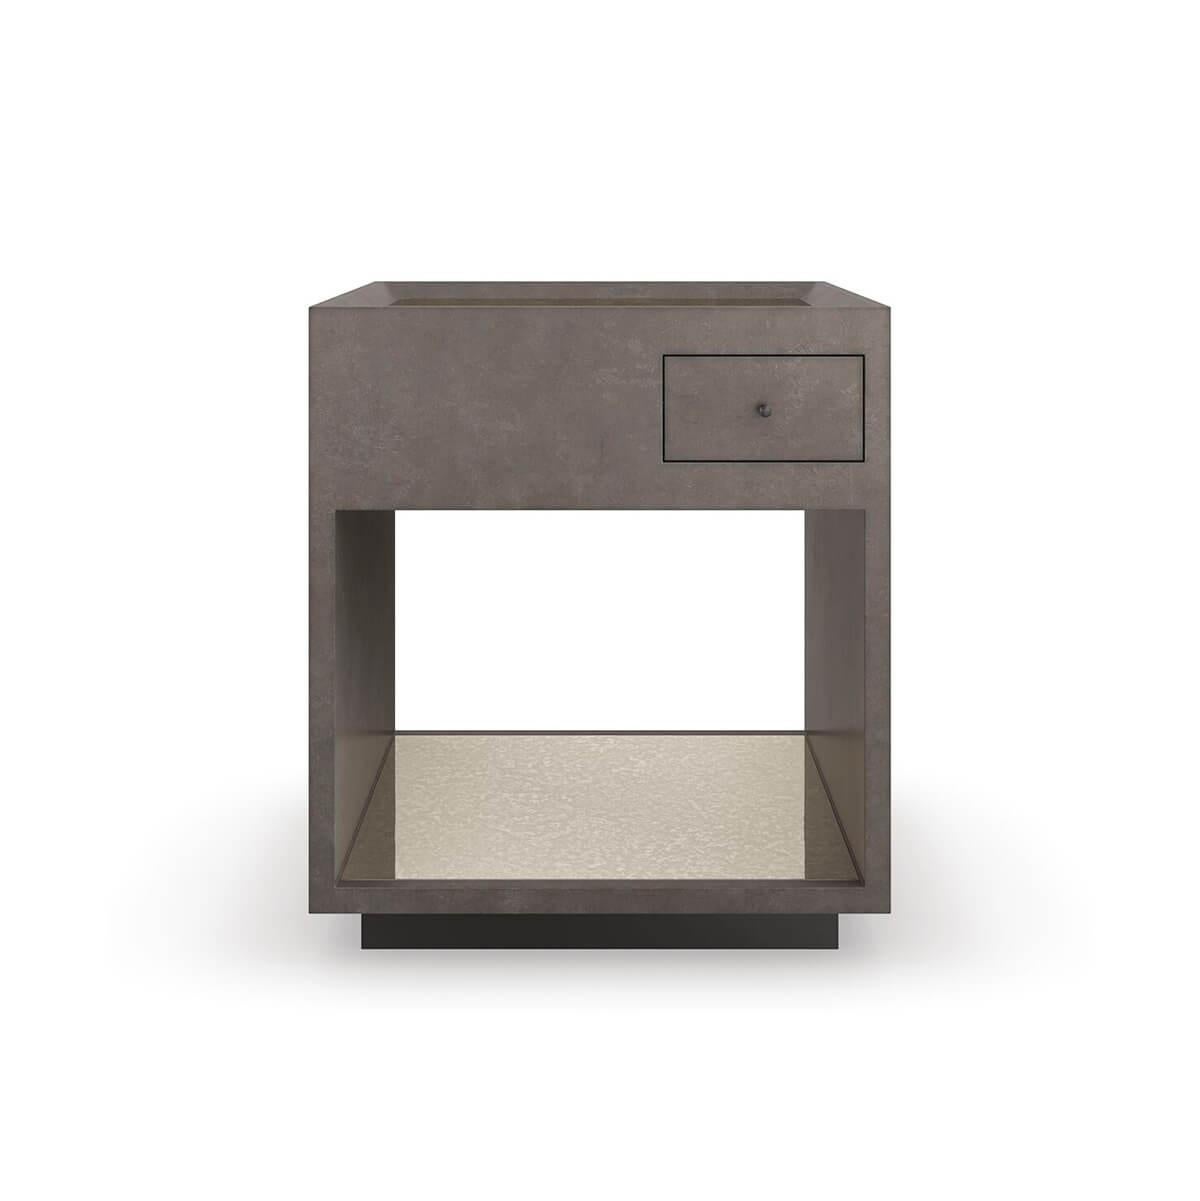 An alluring mix of materials and finishes elevates this end table, featuring a simple square shape and open space for storage and display. An antique mirrored top and shelf creates a sense of depth and warm reflection, complemented by an overall